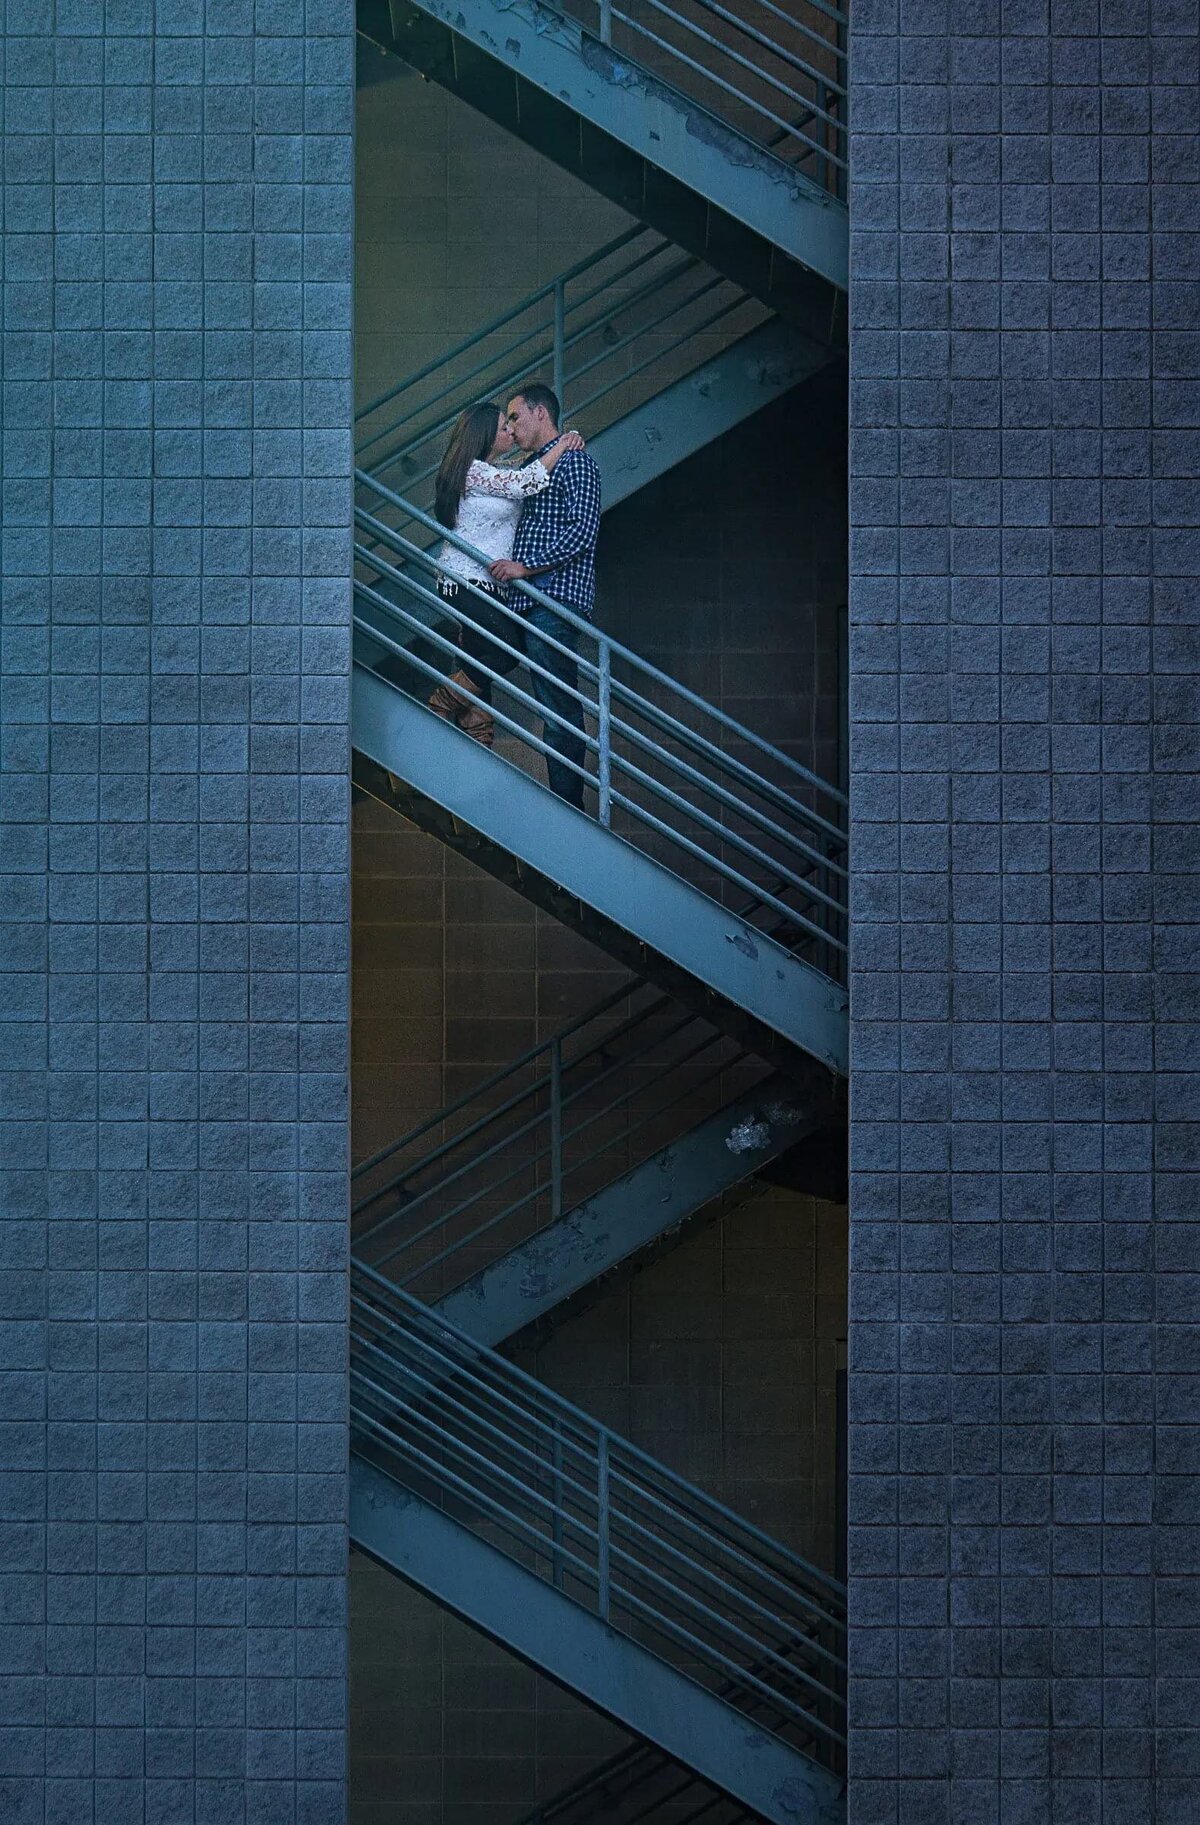 Couple sharing a moment on a staircase within a modern architectural structure, surrounded by large gray tiles